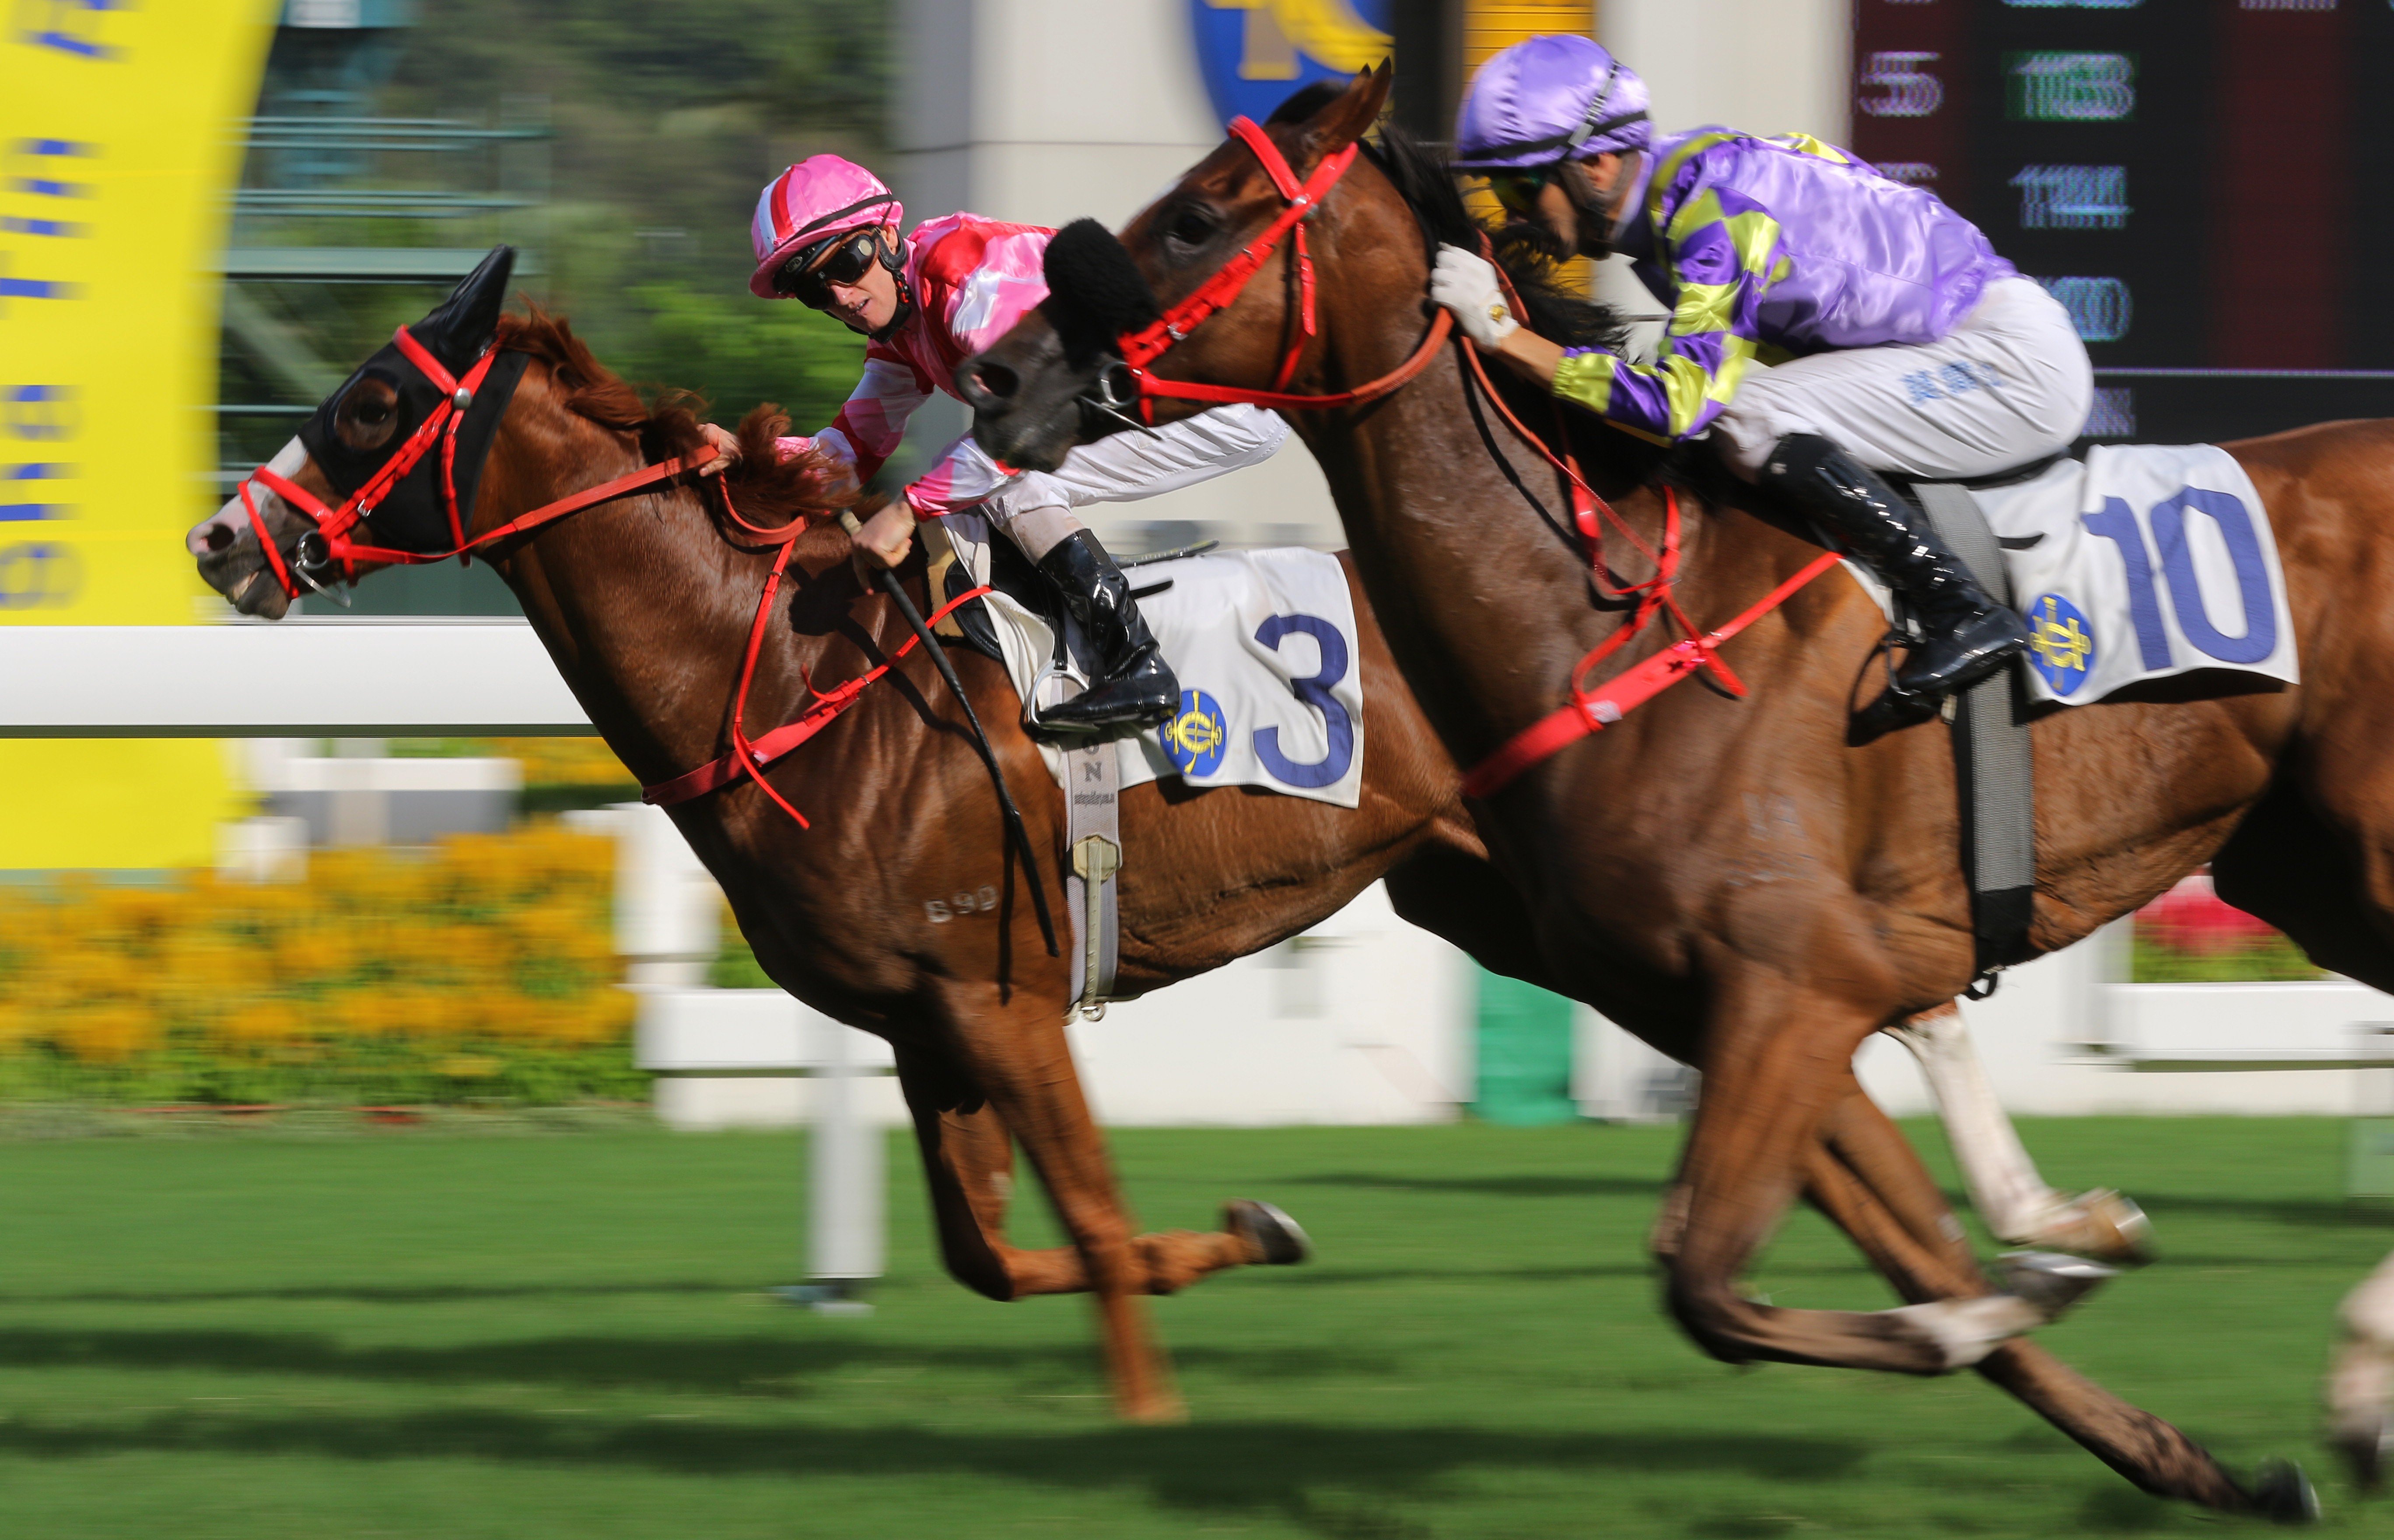 Zac Purton (left) and Joao Moreira duke out another finish. Photo: Kenneth Chan